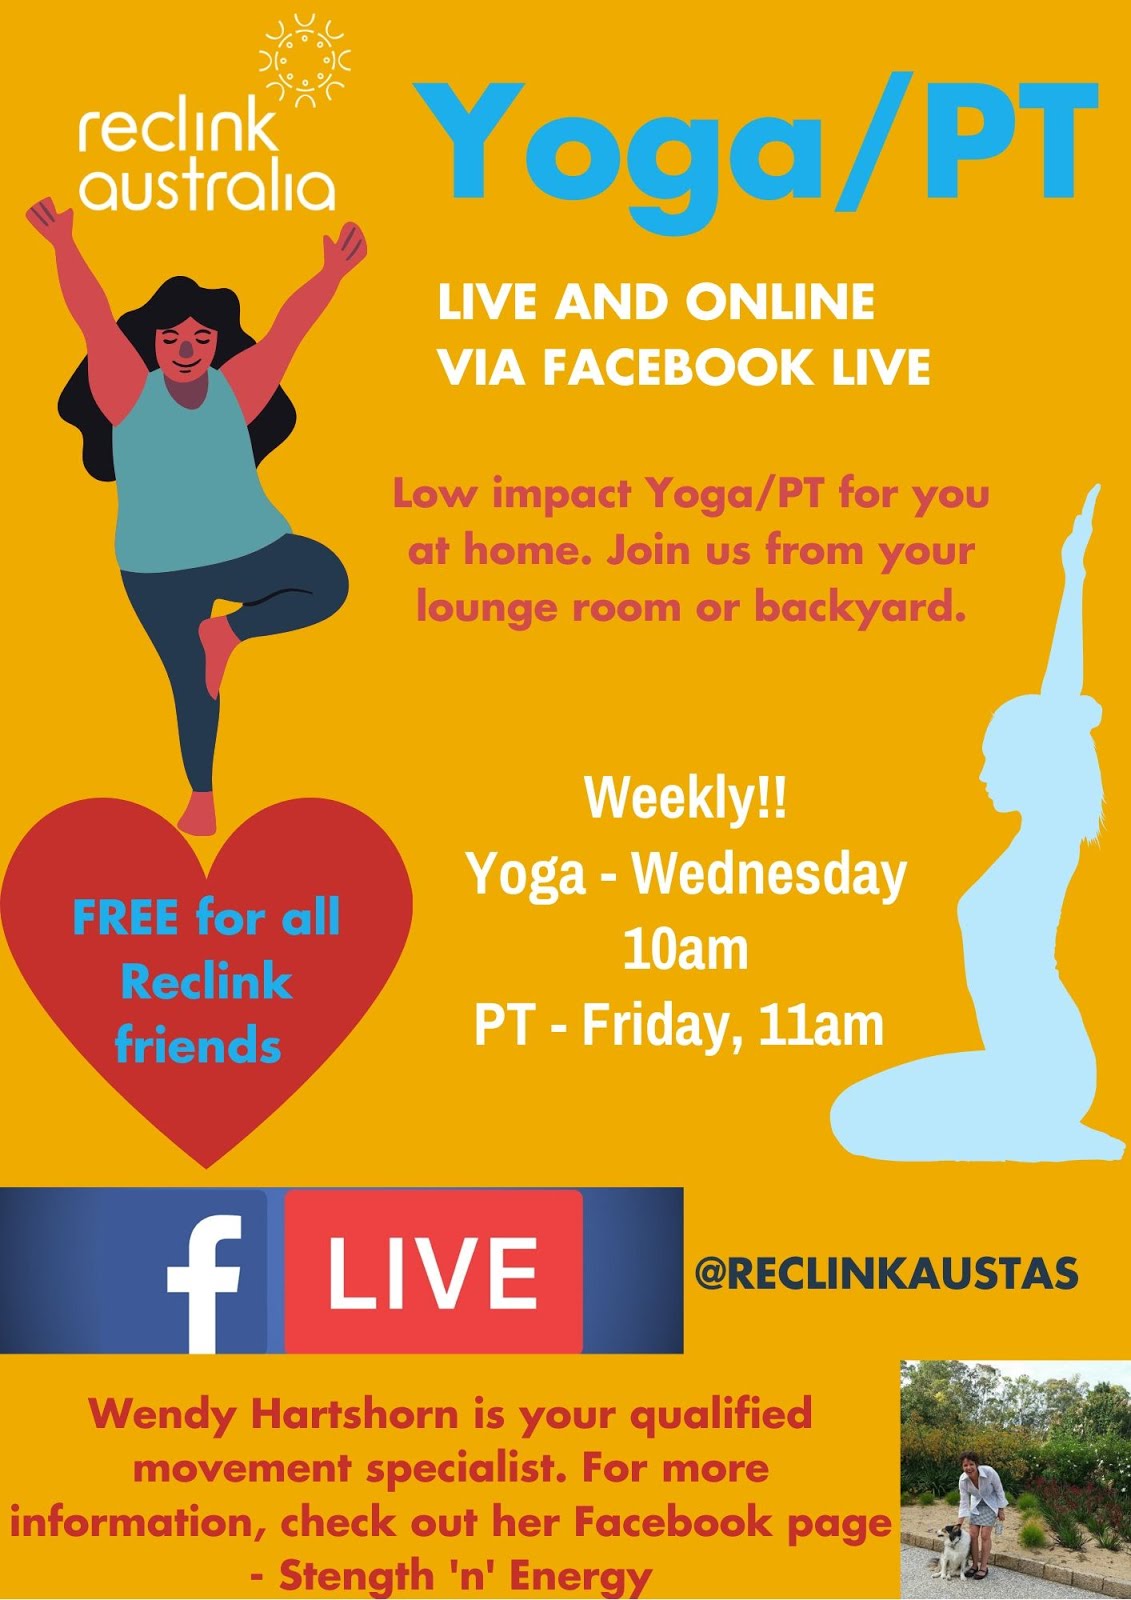 Reclink is bringing a program of hybrid Yoga /Thai Chi and PT. Click poster image to FACEBOOK LIVE